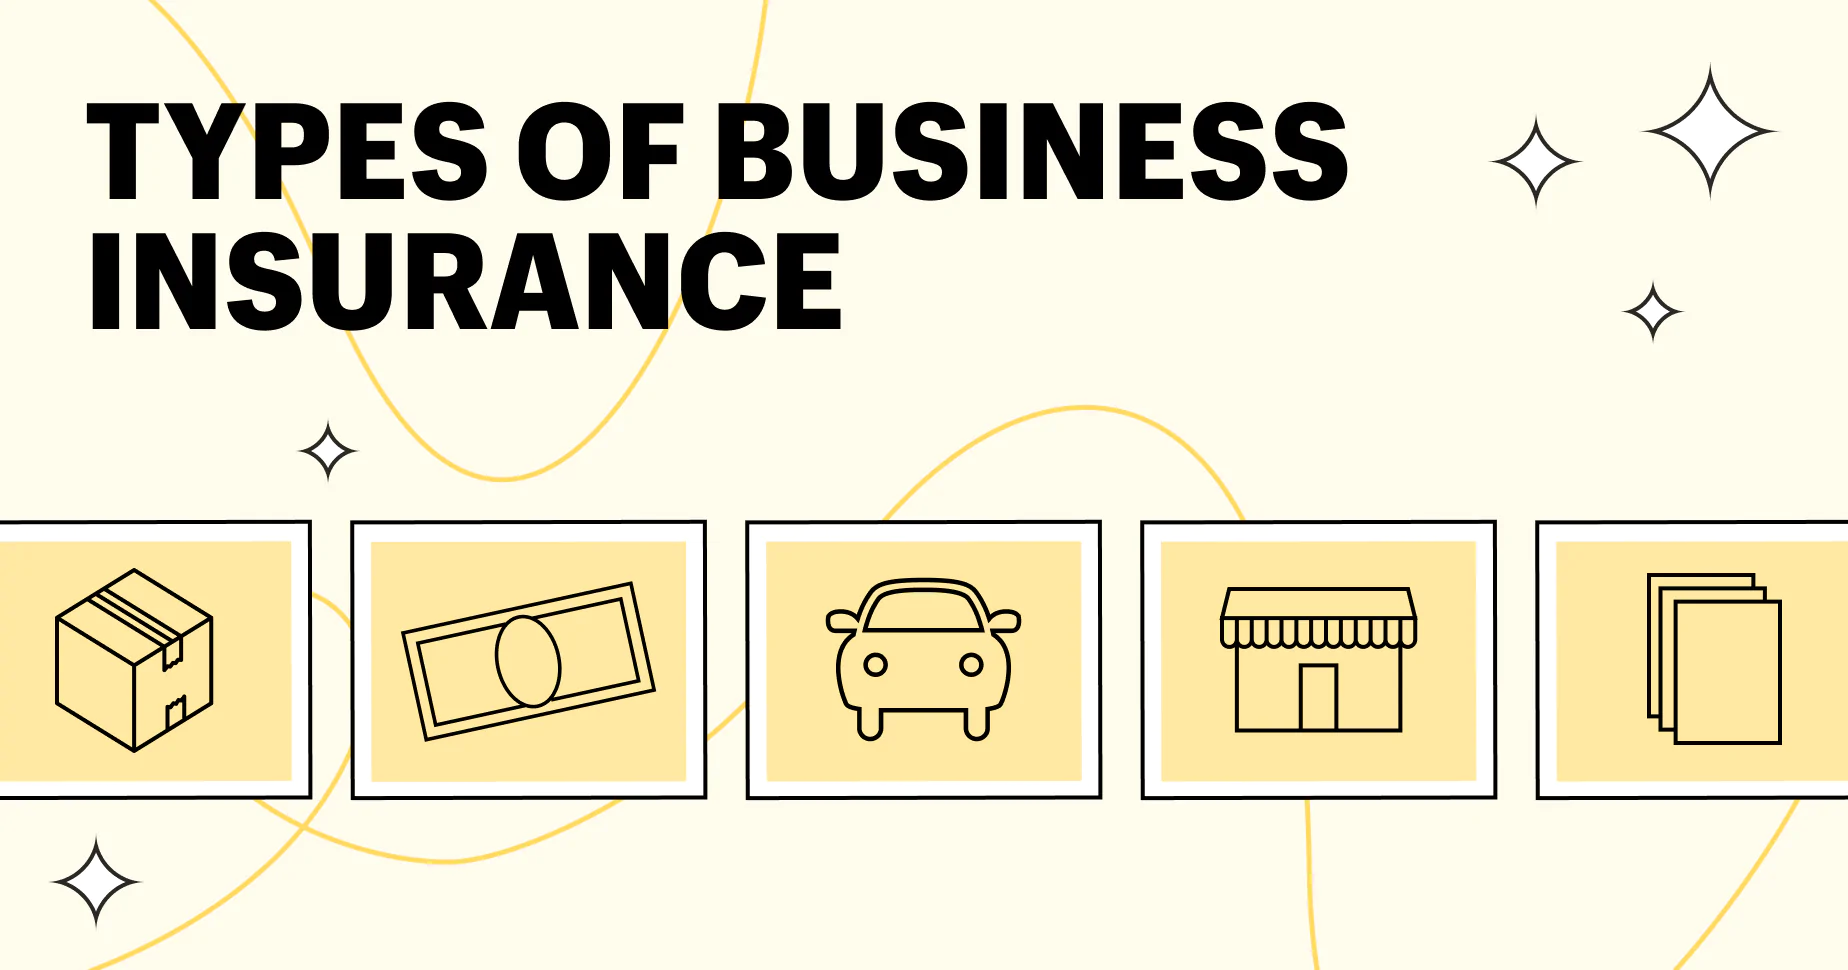 Different types of insurance coverage for your business.